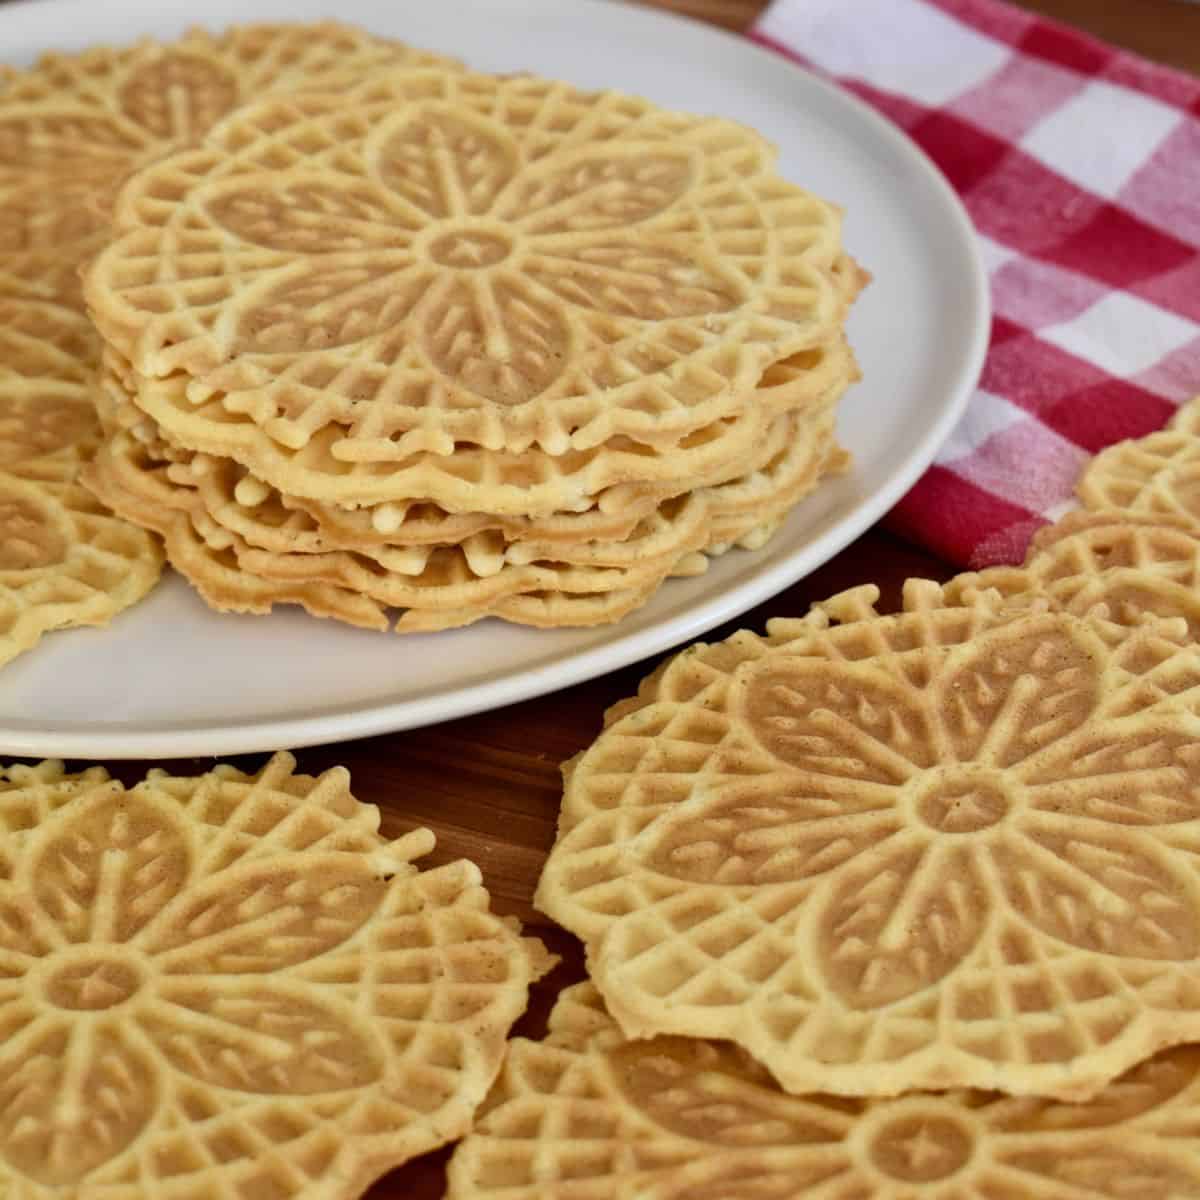 Classic Pizzelle Recipe For Italian Waffle Cookies - Unsophisticook